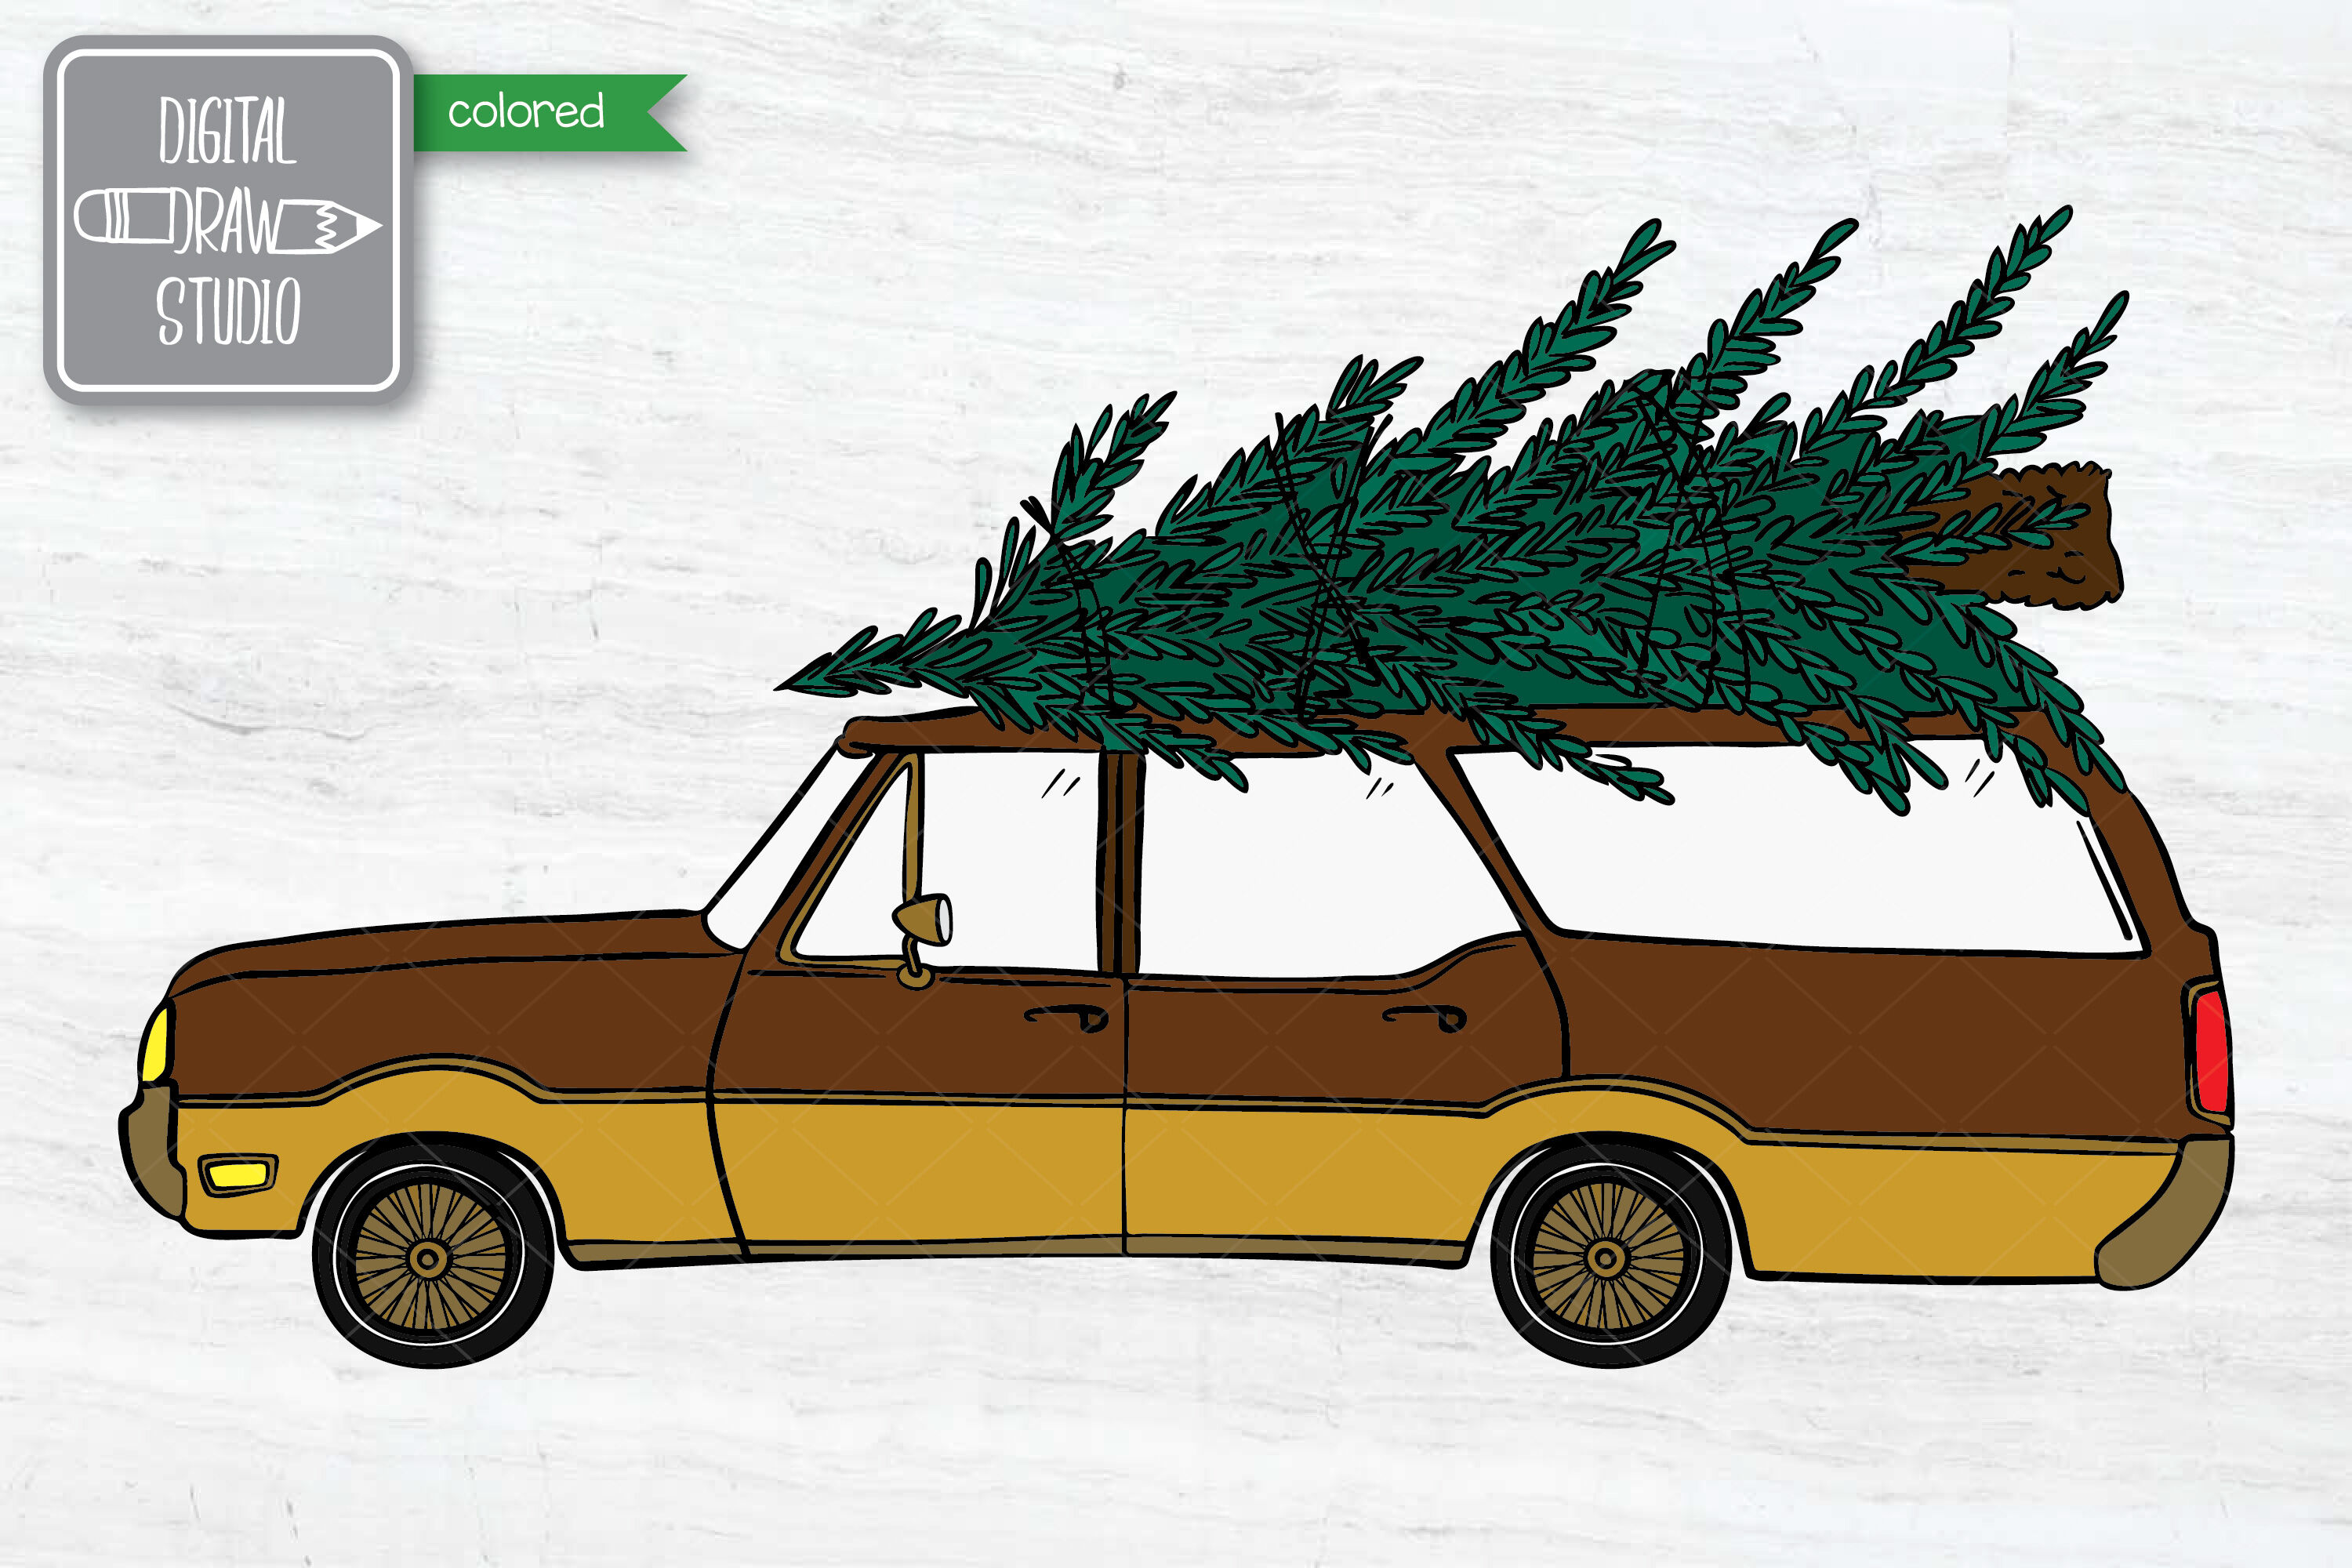 Colored Station Wagon Car with Christmas Tree on Roof Top Holiday By